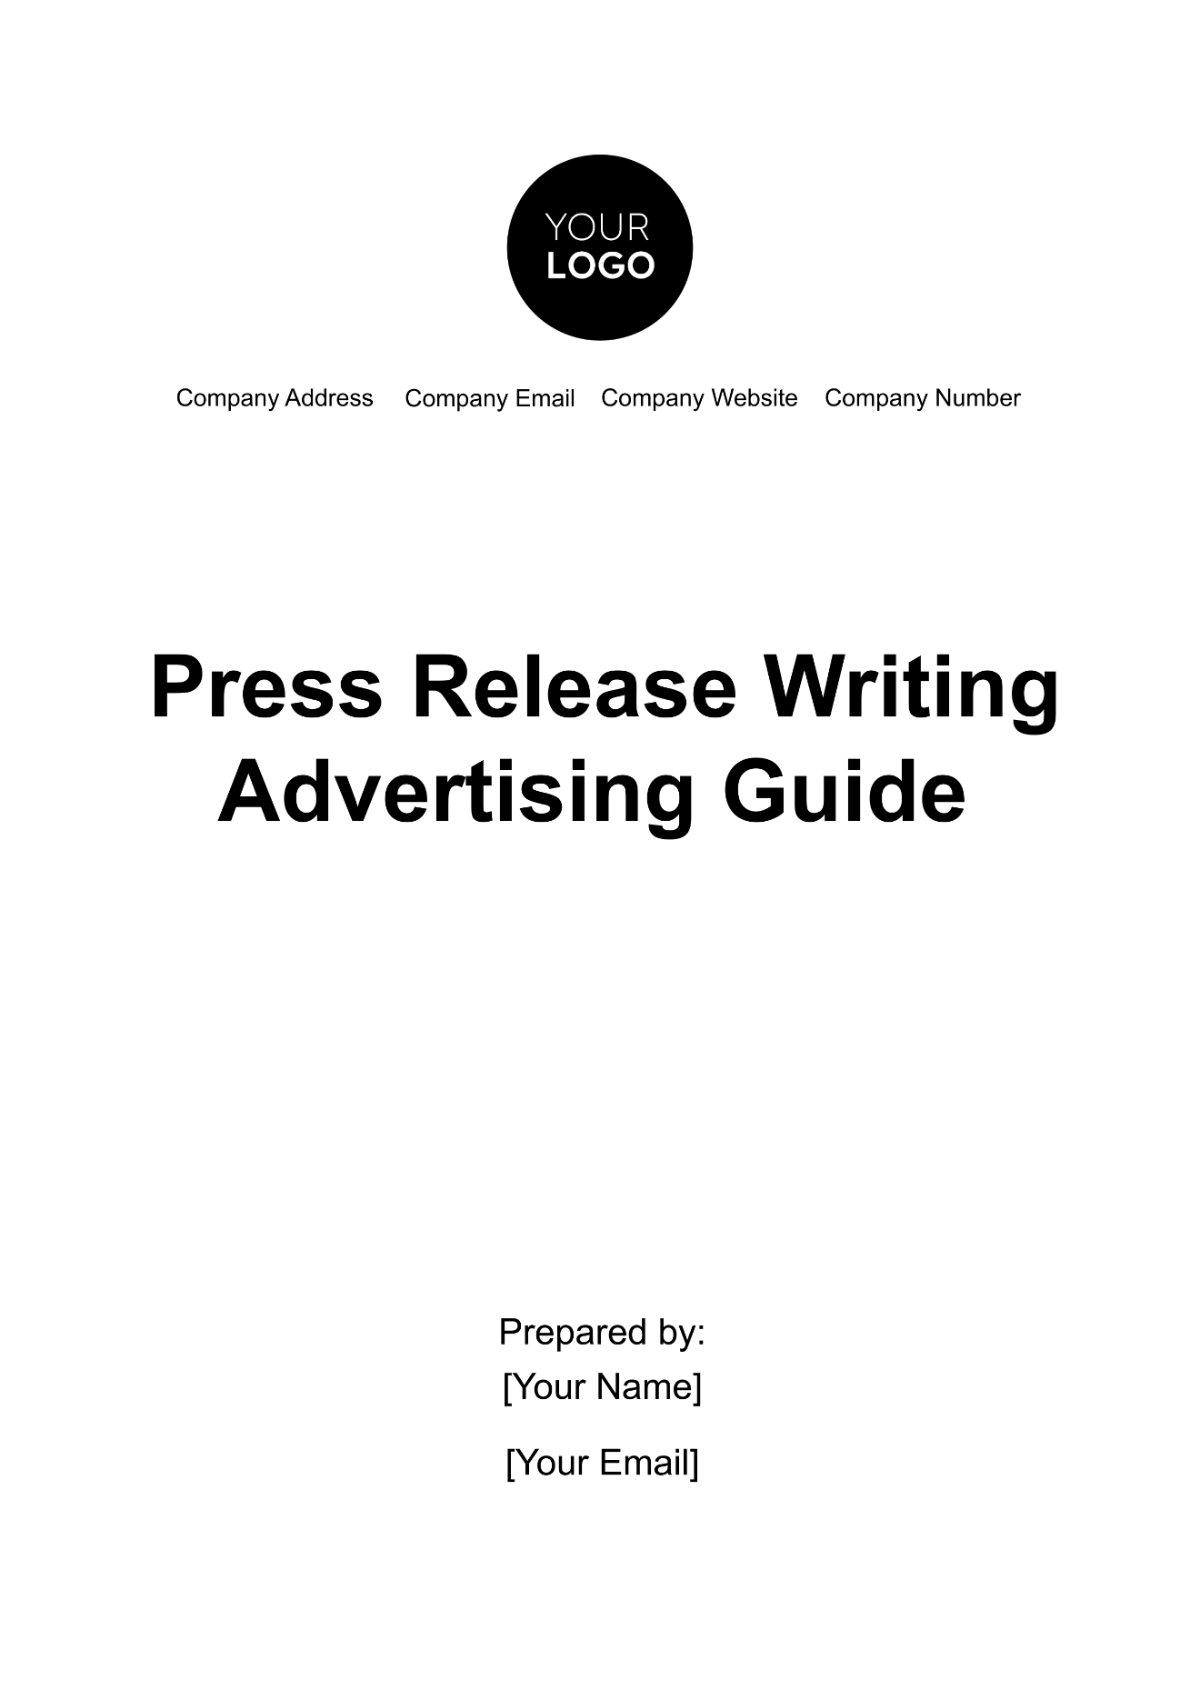 Press Release Writing Advertising Guide Template